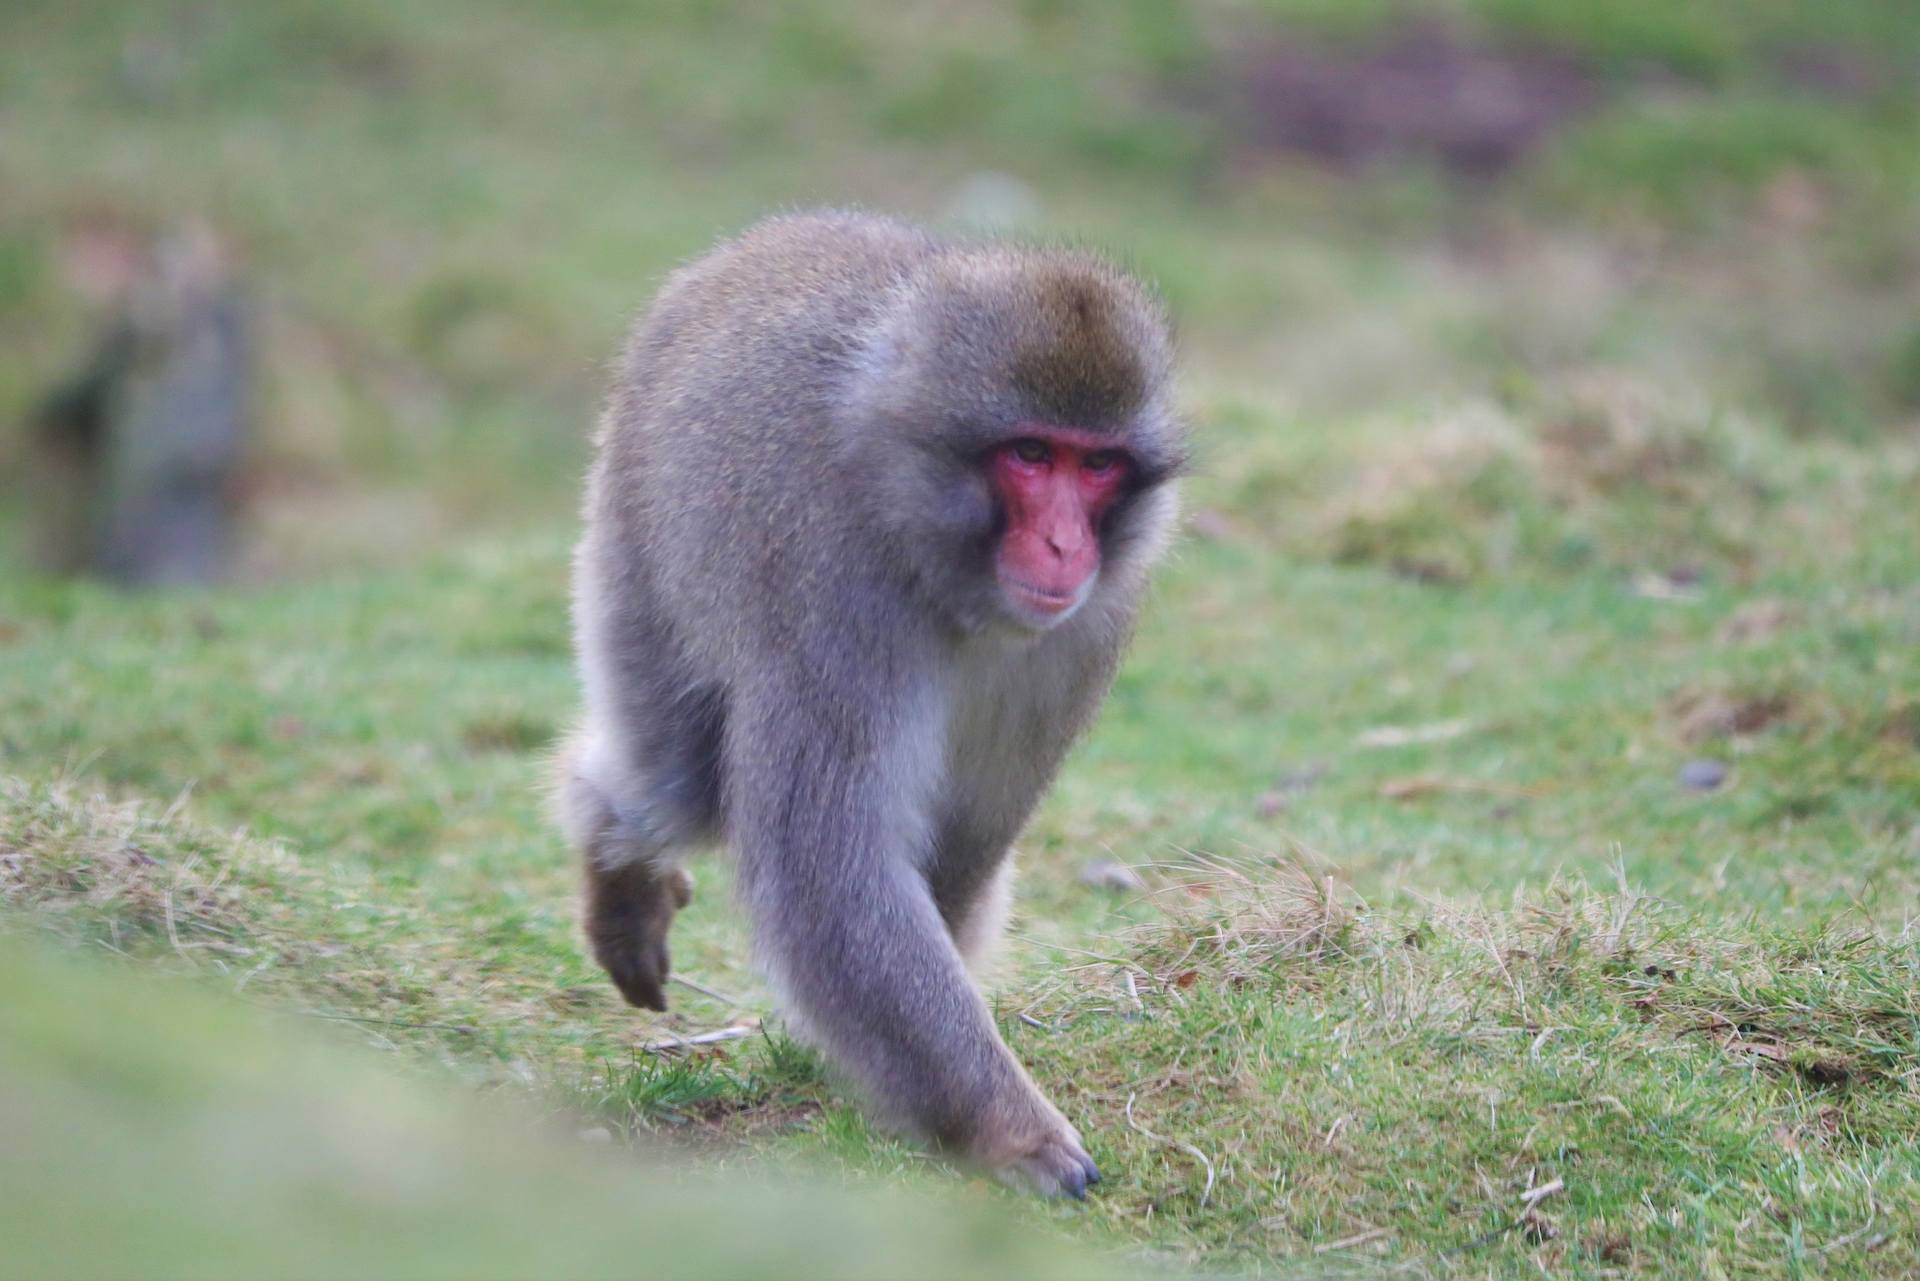 Japanese macaque walking on all fours across the grass towards the right IMAGE: Amy Middleton 2023